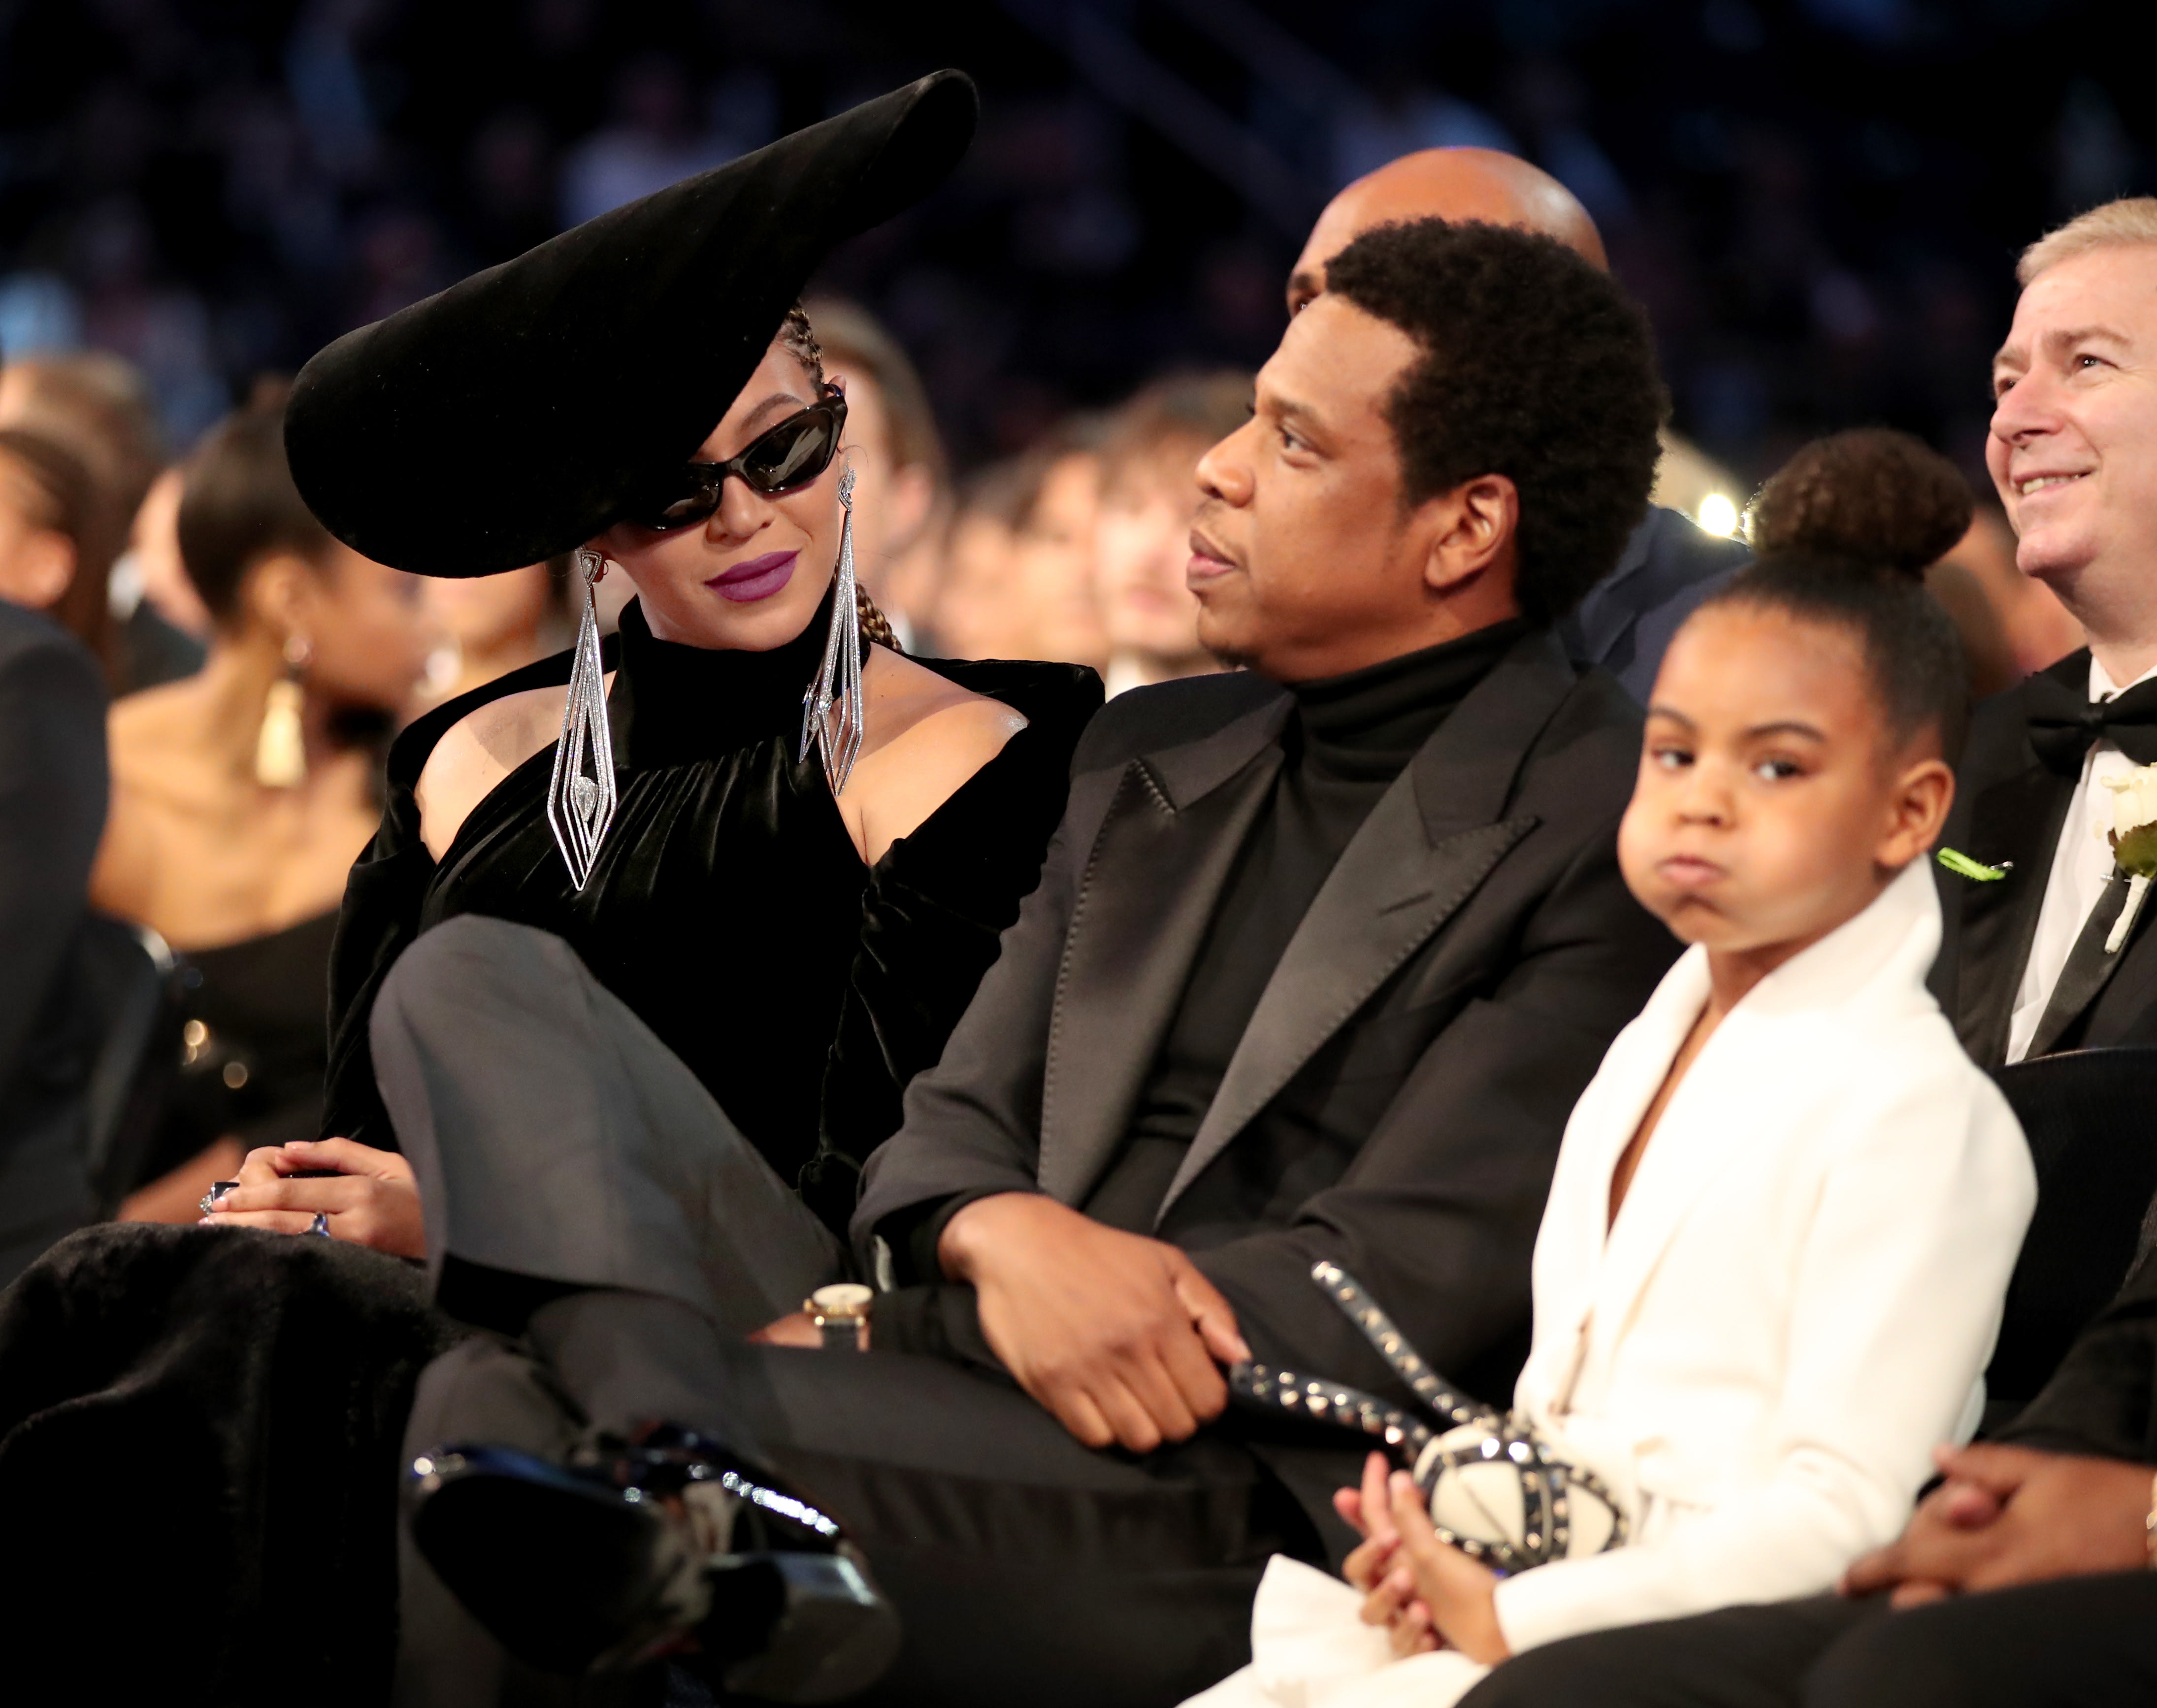 Beyonce, Jay-Z and Blue Ivy Carter attends the 60th Annual GRAMMY Awards